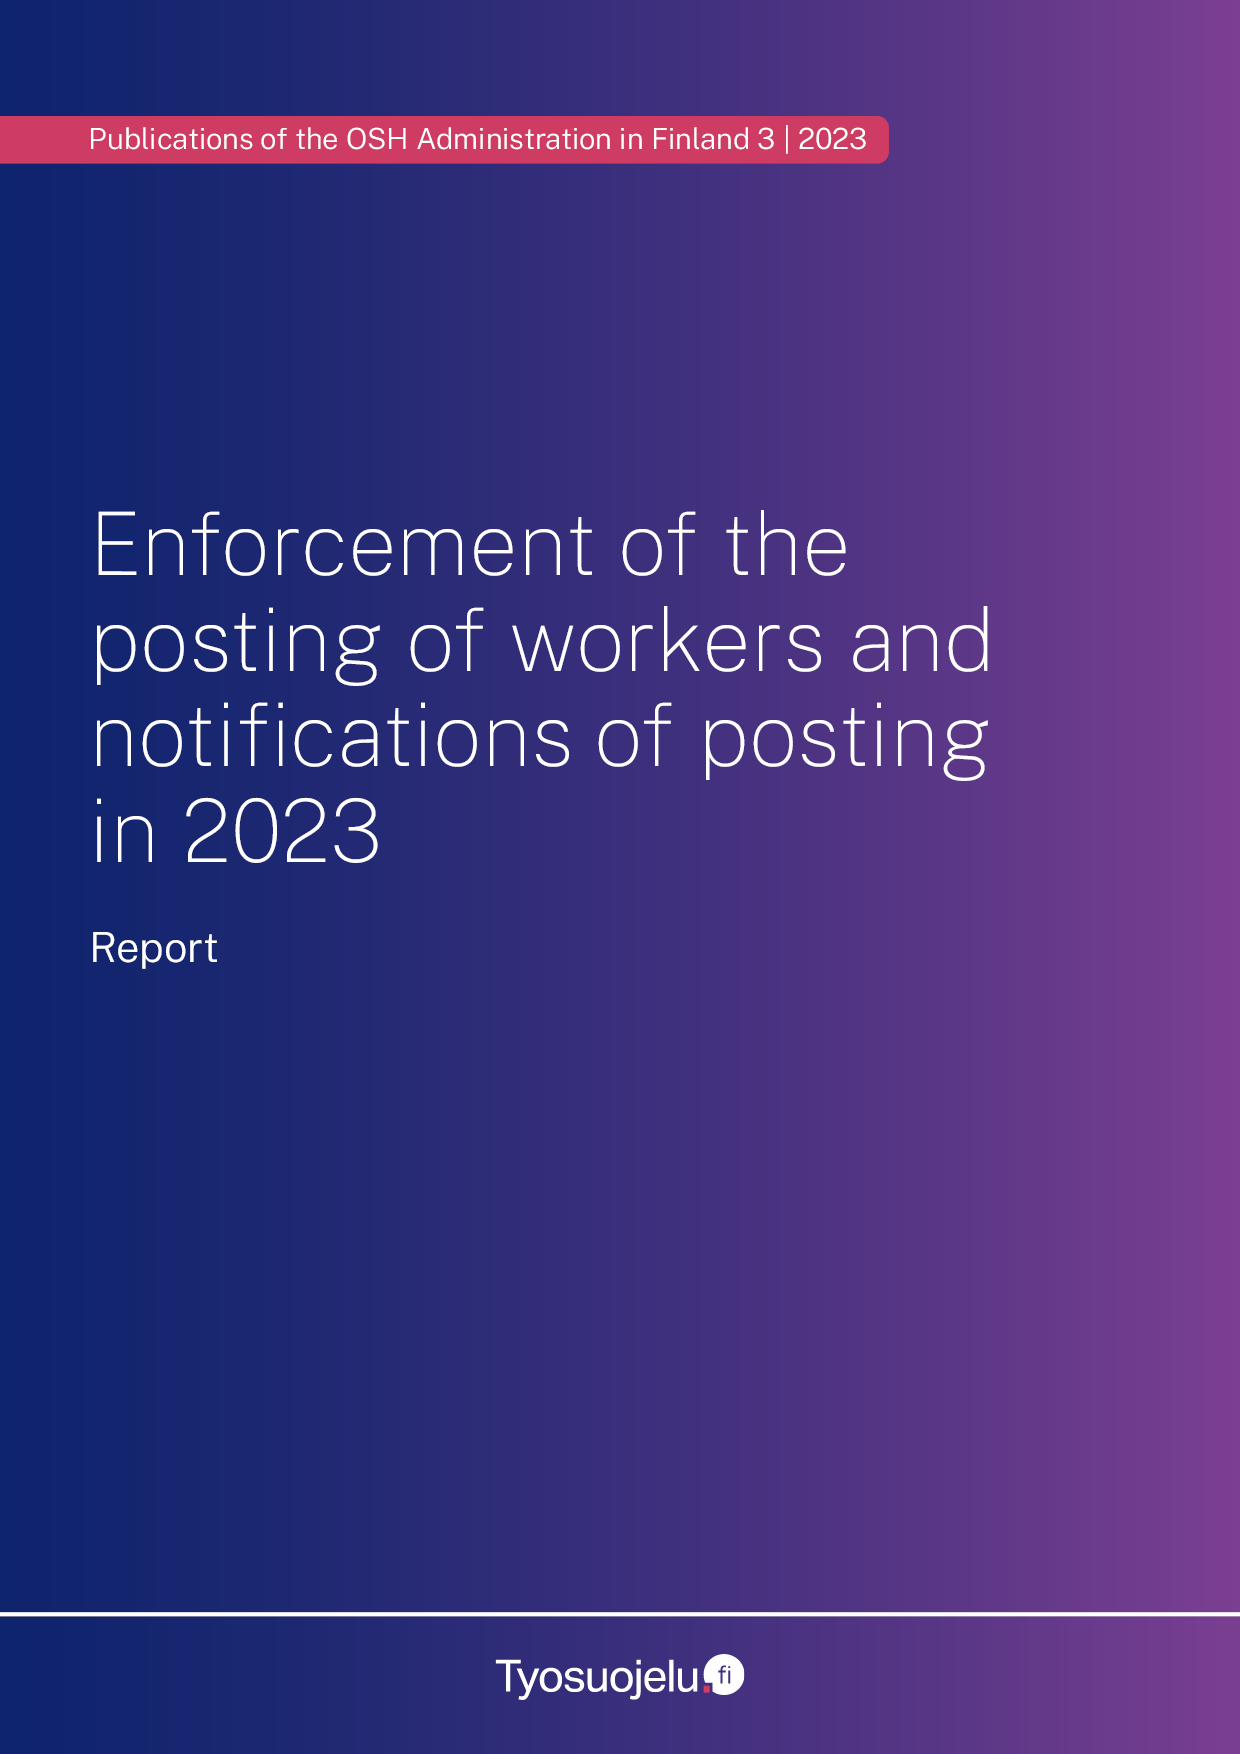 Cover of the report Enforcement of the posting of workers and notifications of posting in 2023.